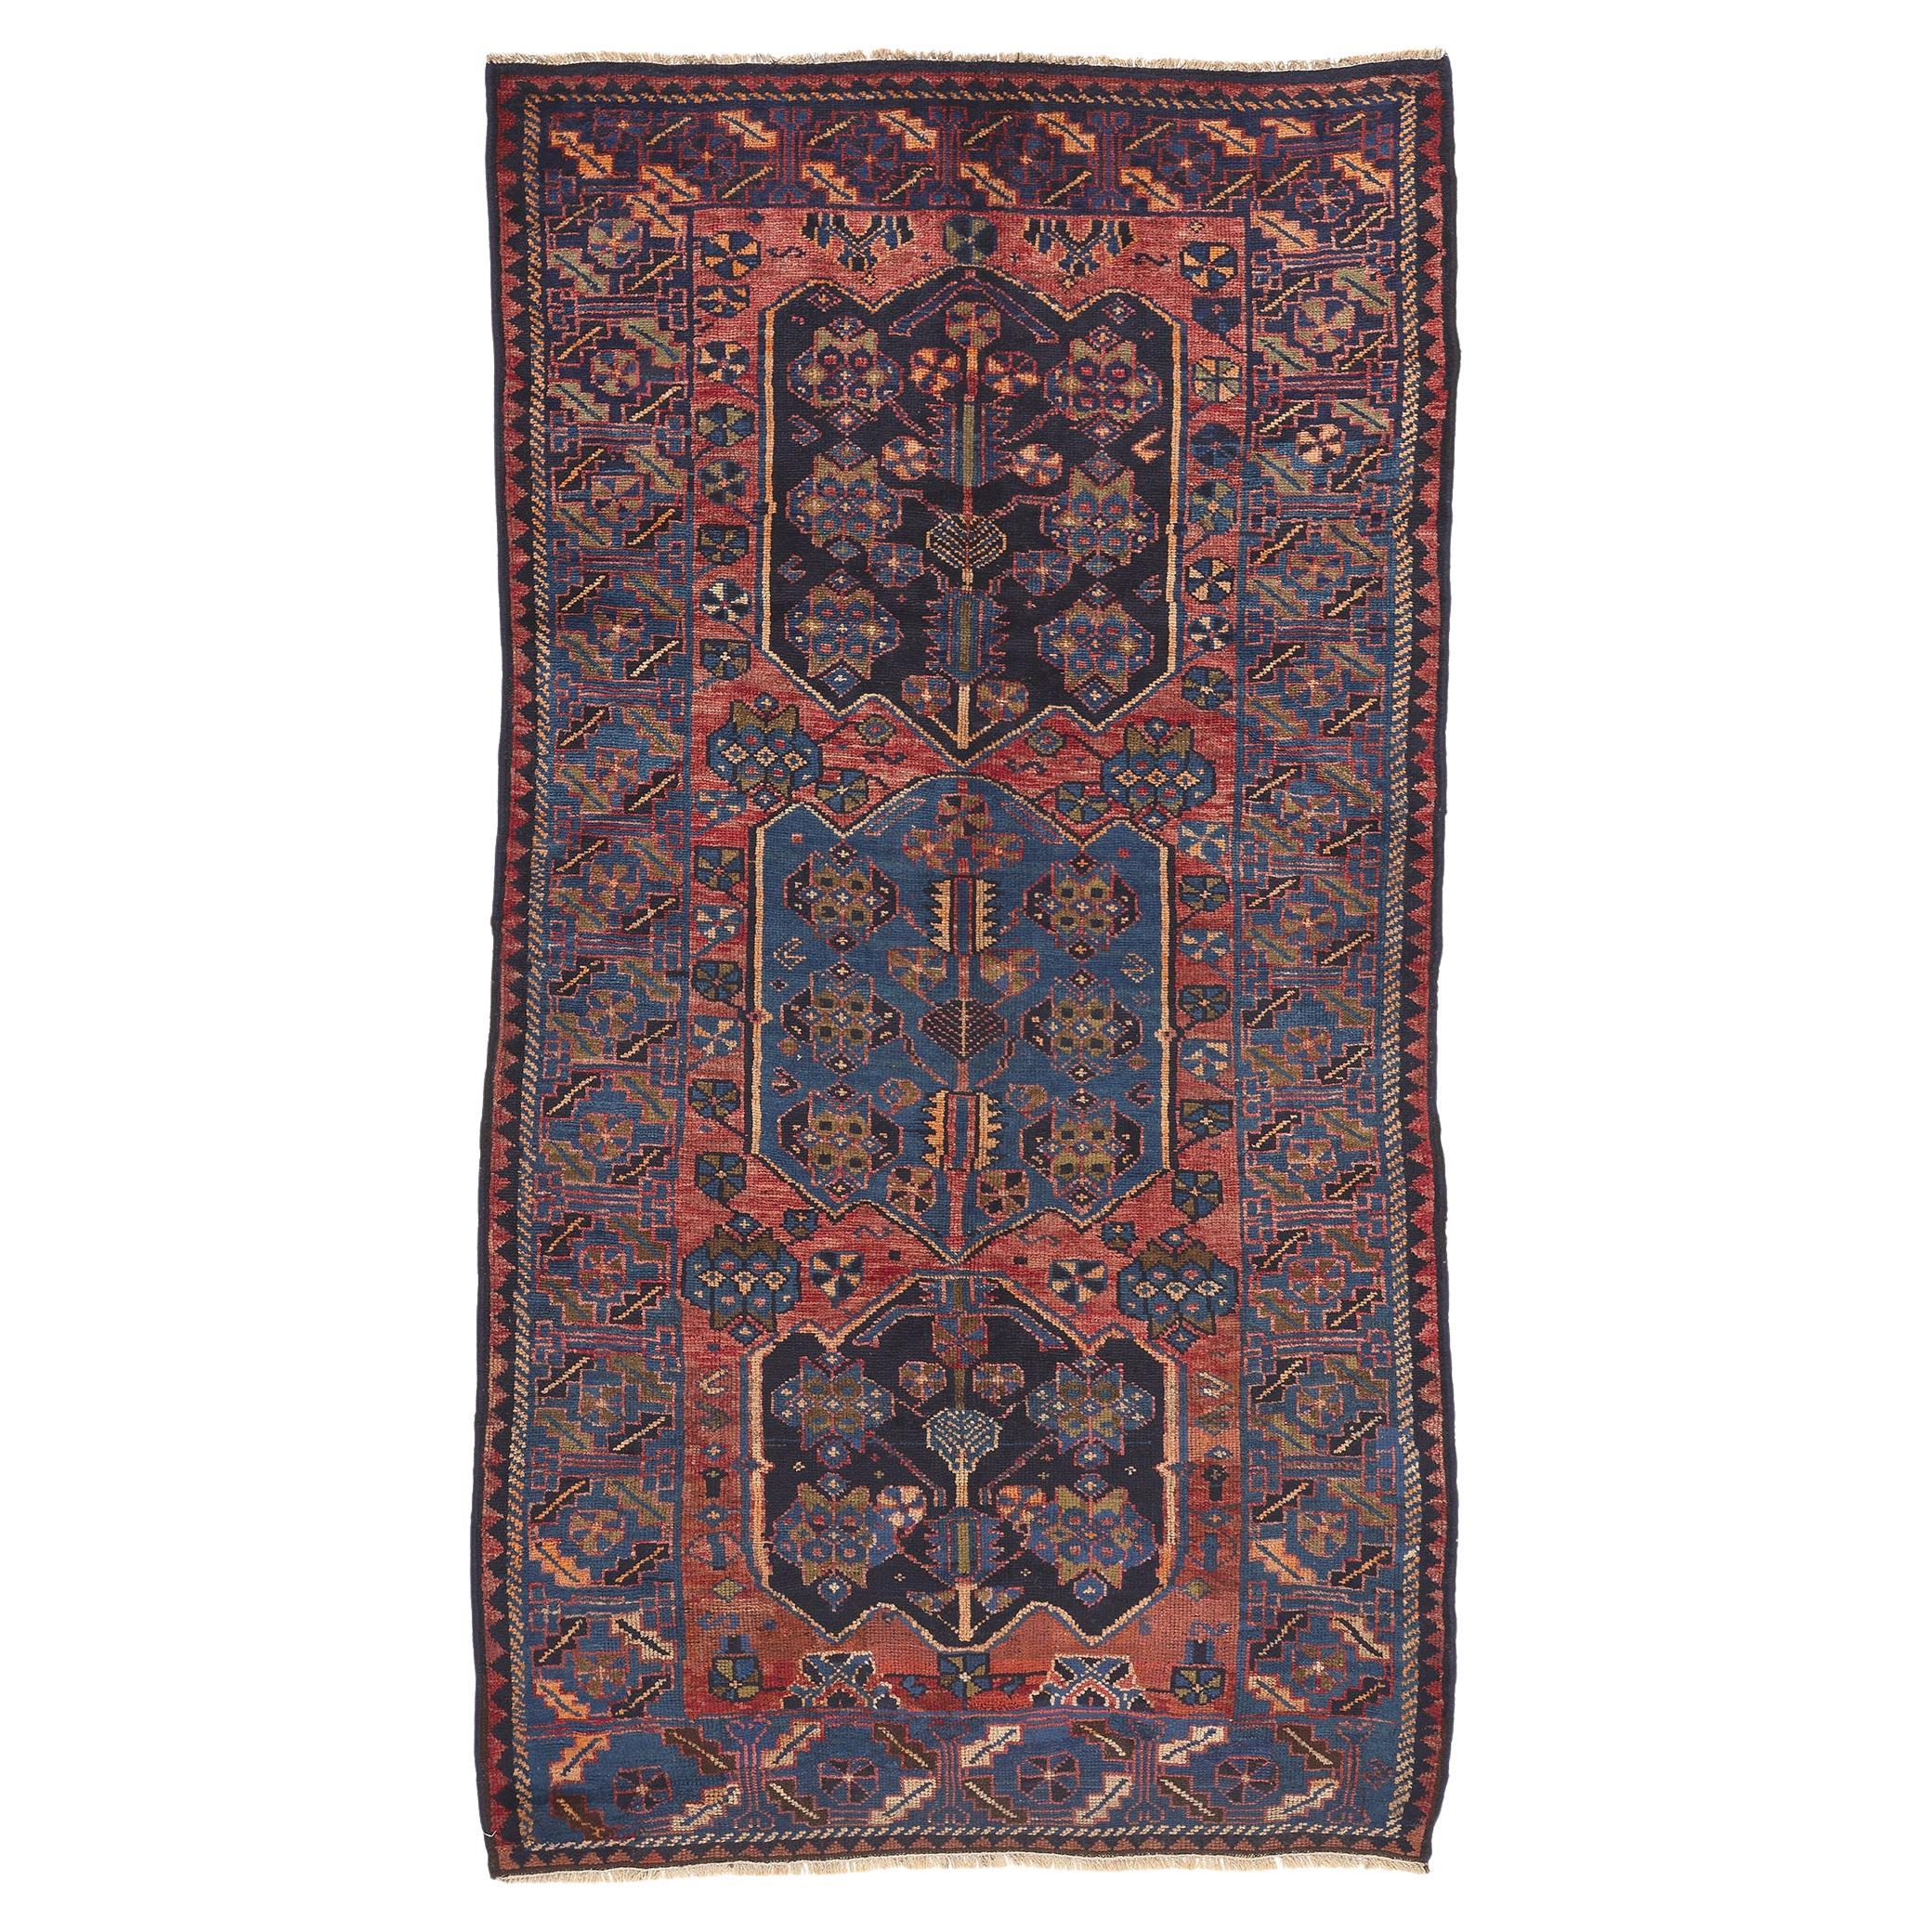 Antique Persian Tribal Shiraz Rug with Qashqai Tribe Influence For Sale